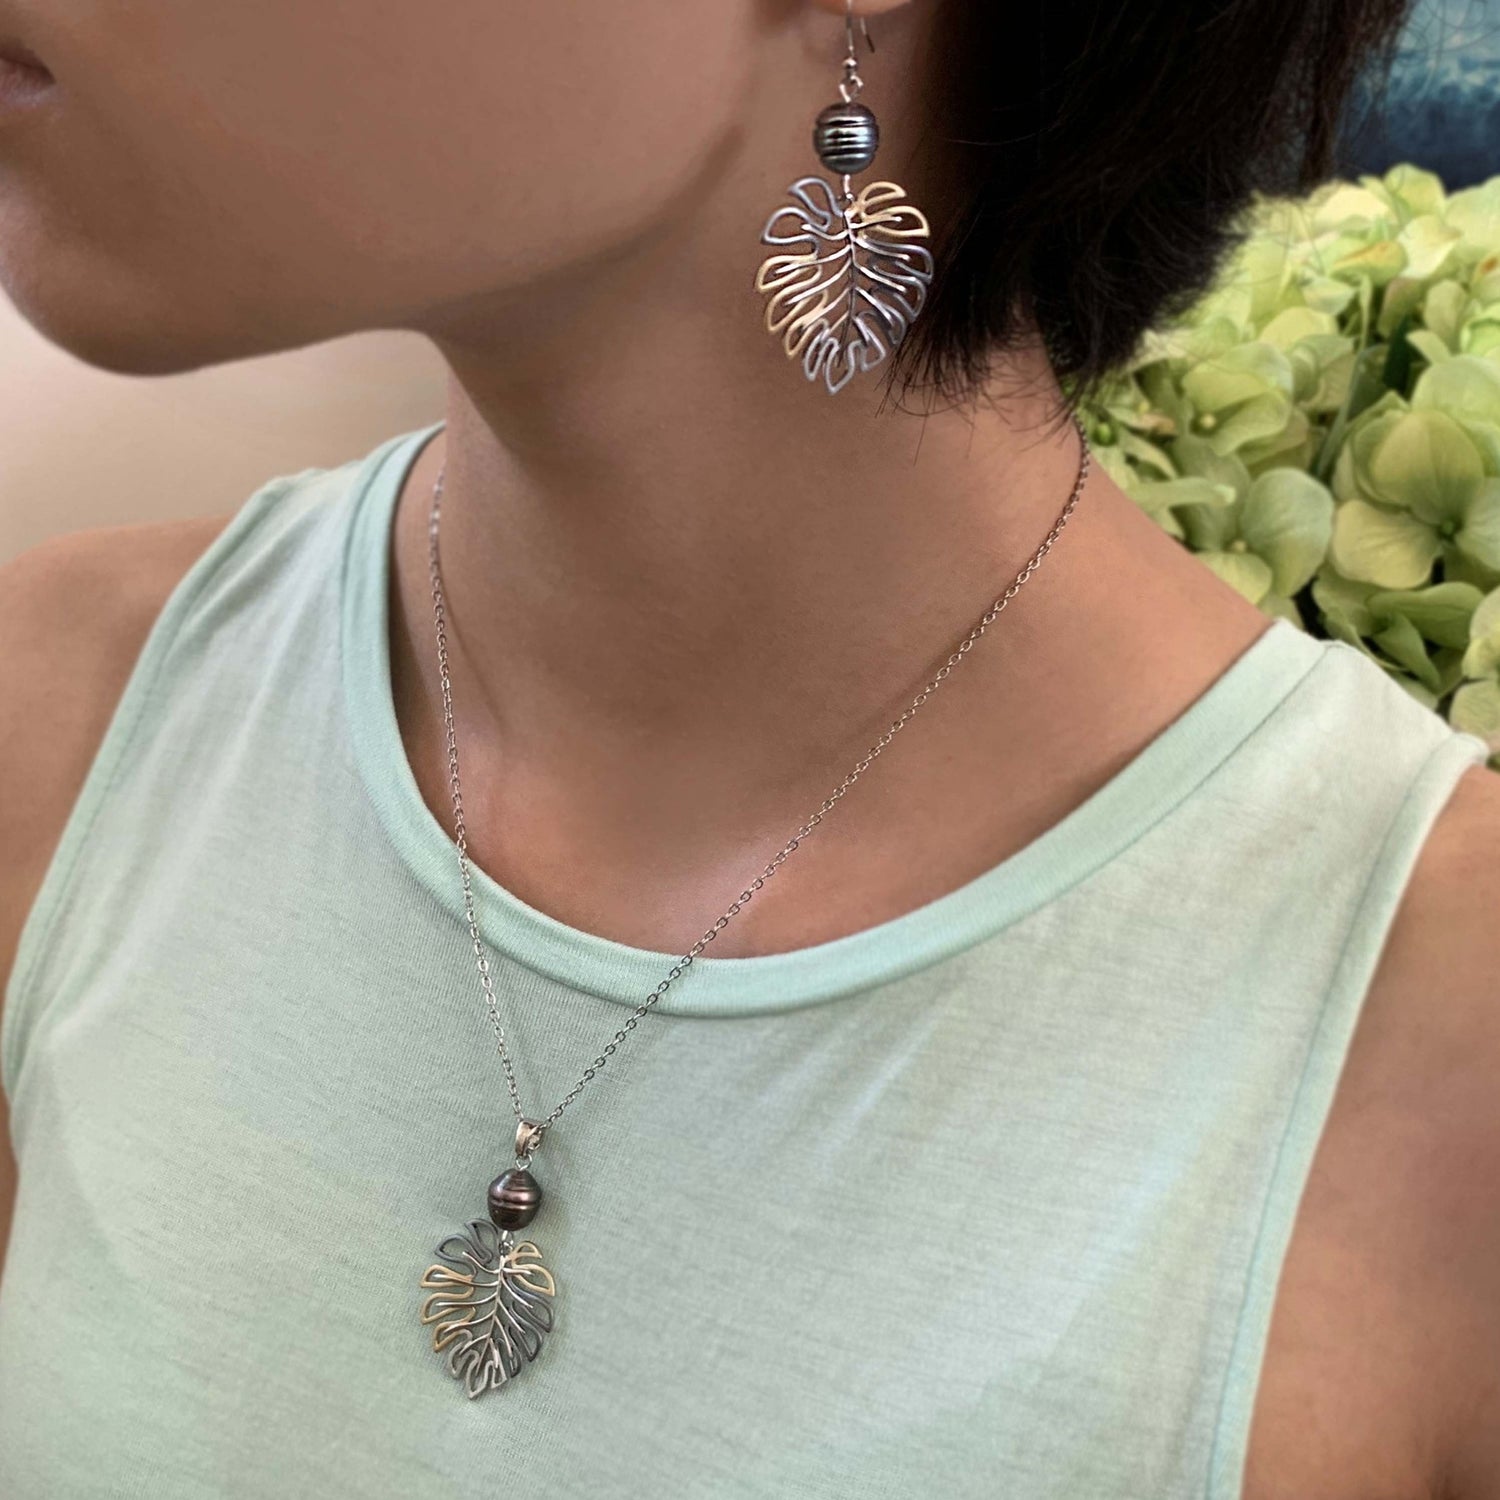 Monstera Earring and Matching Pendant on model